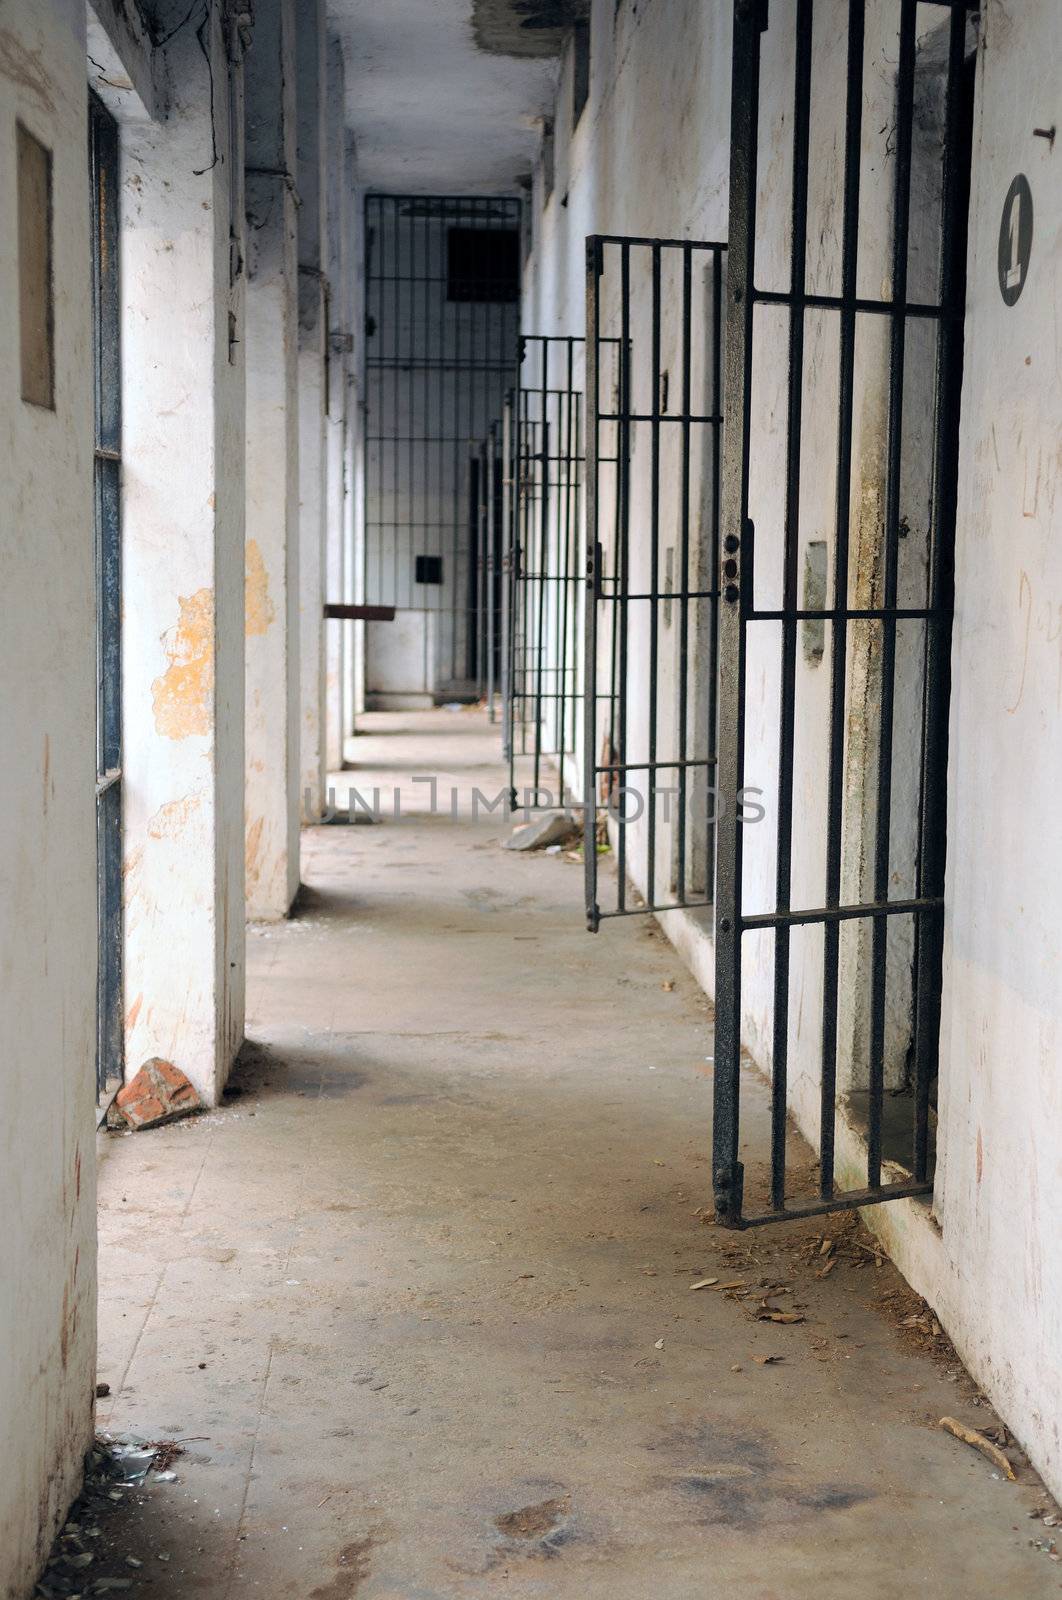 A deserted prison cell in a southern city in India